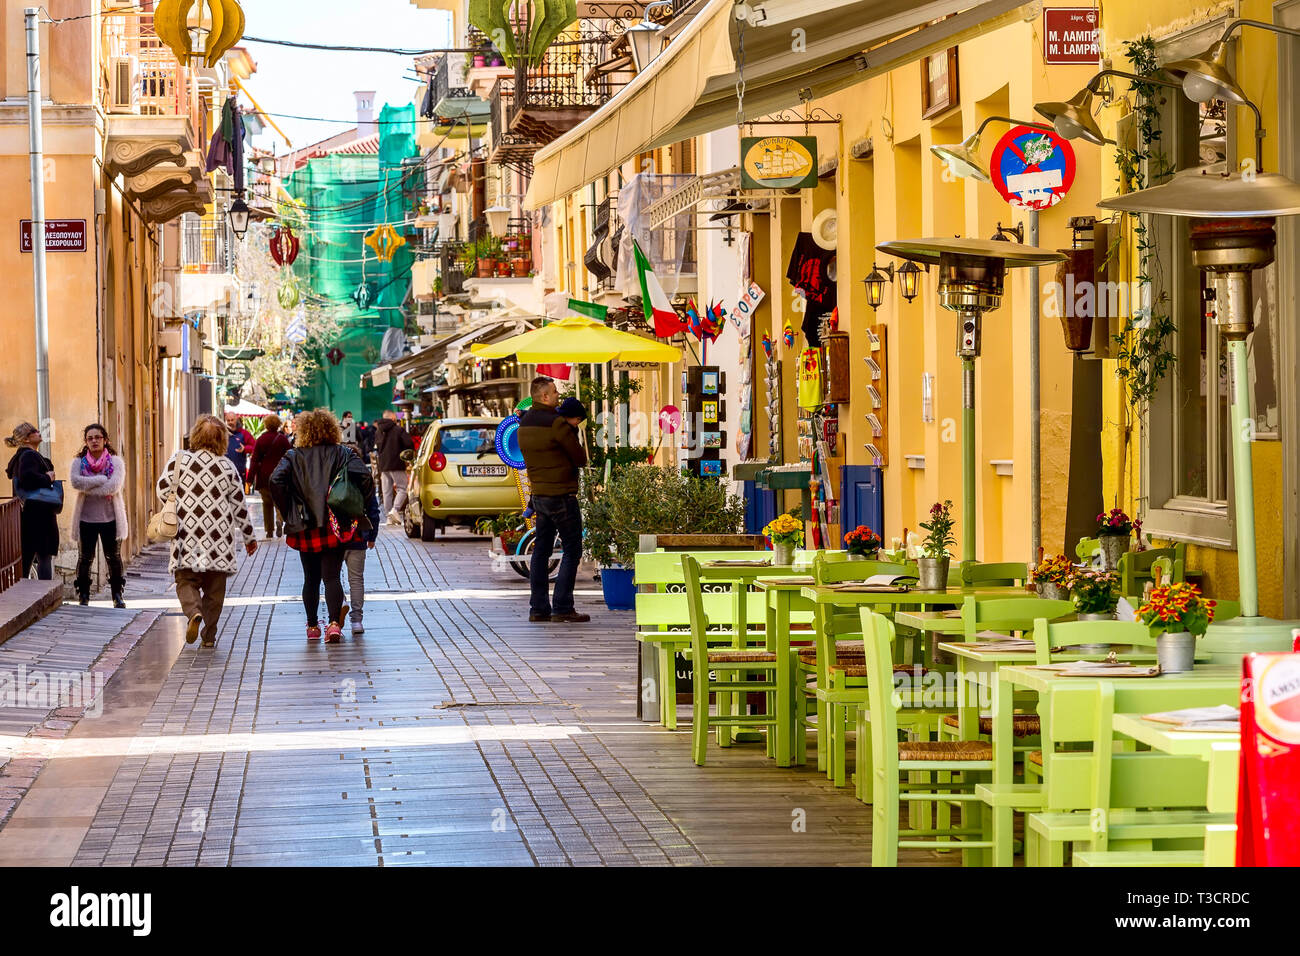 Nafplio, Greece - March 30, 2019: Old town street panorama with restaurants in Nafplion, Peloponnese Stock Photo